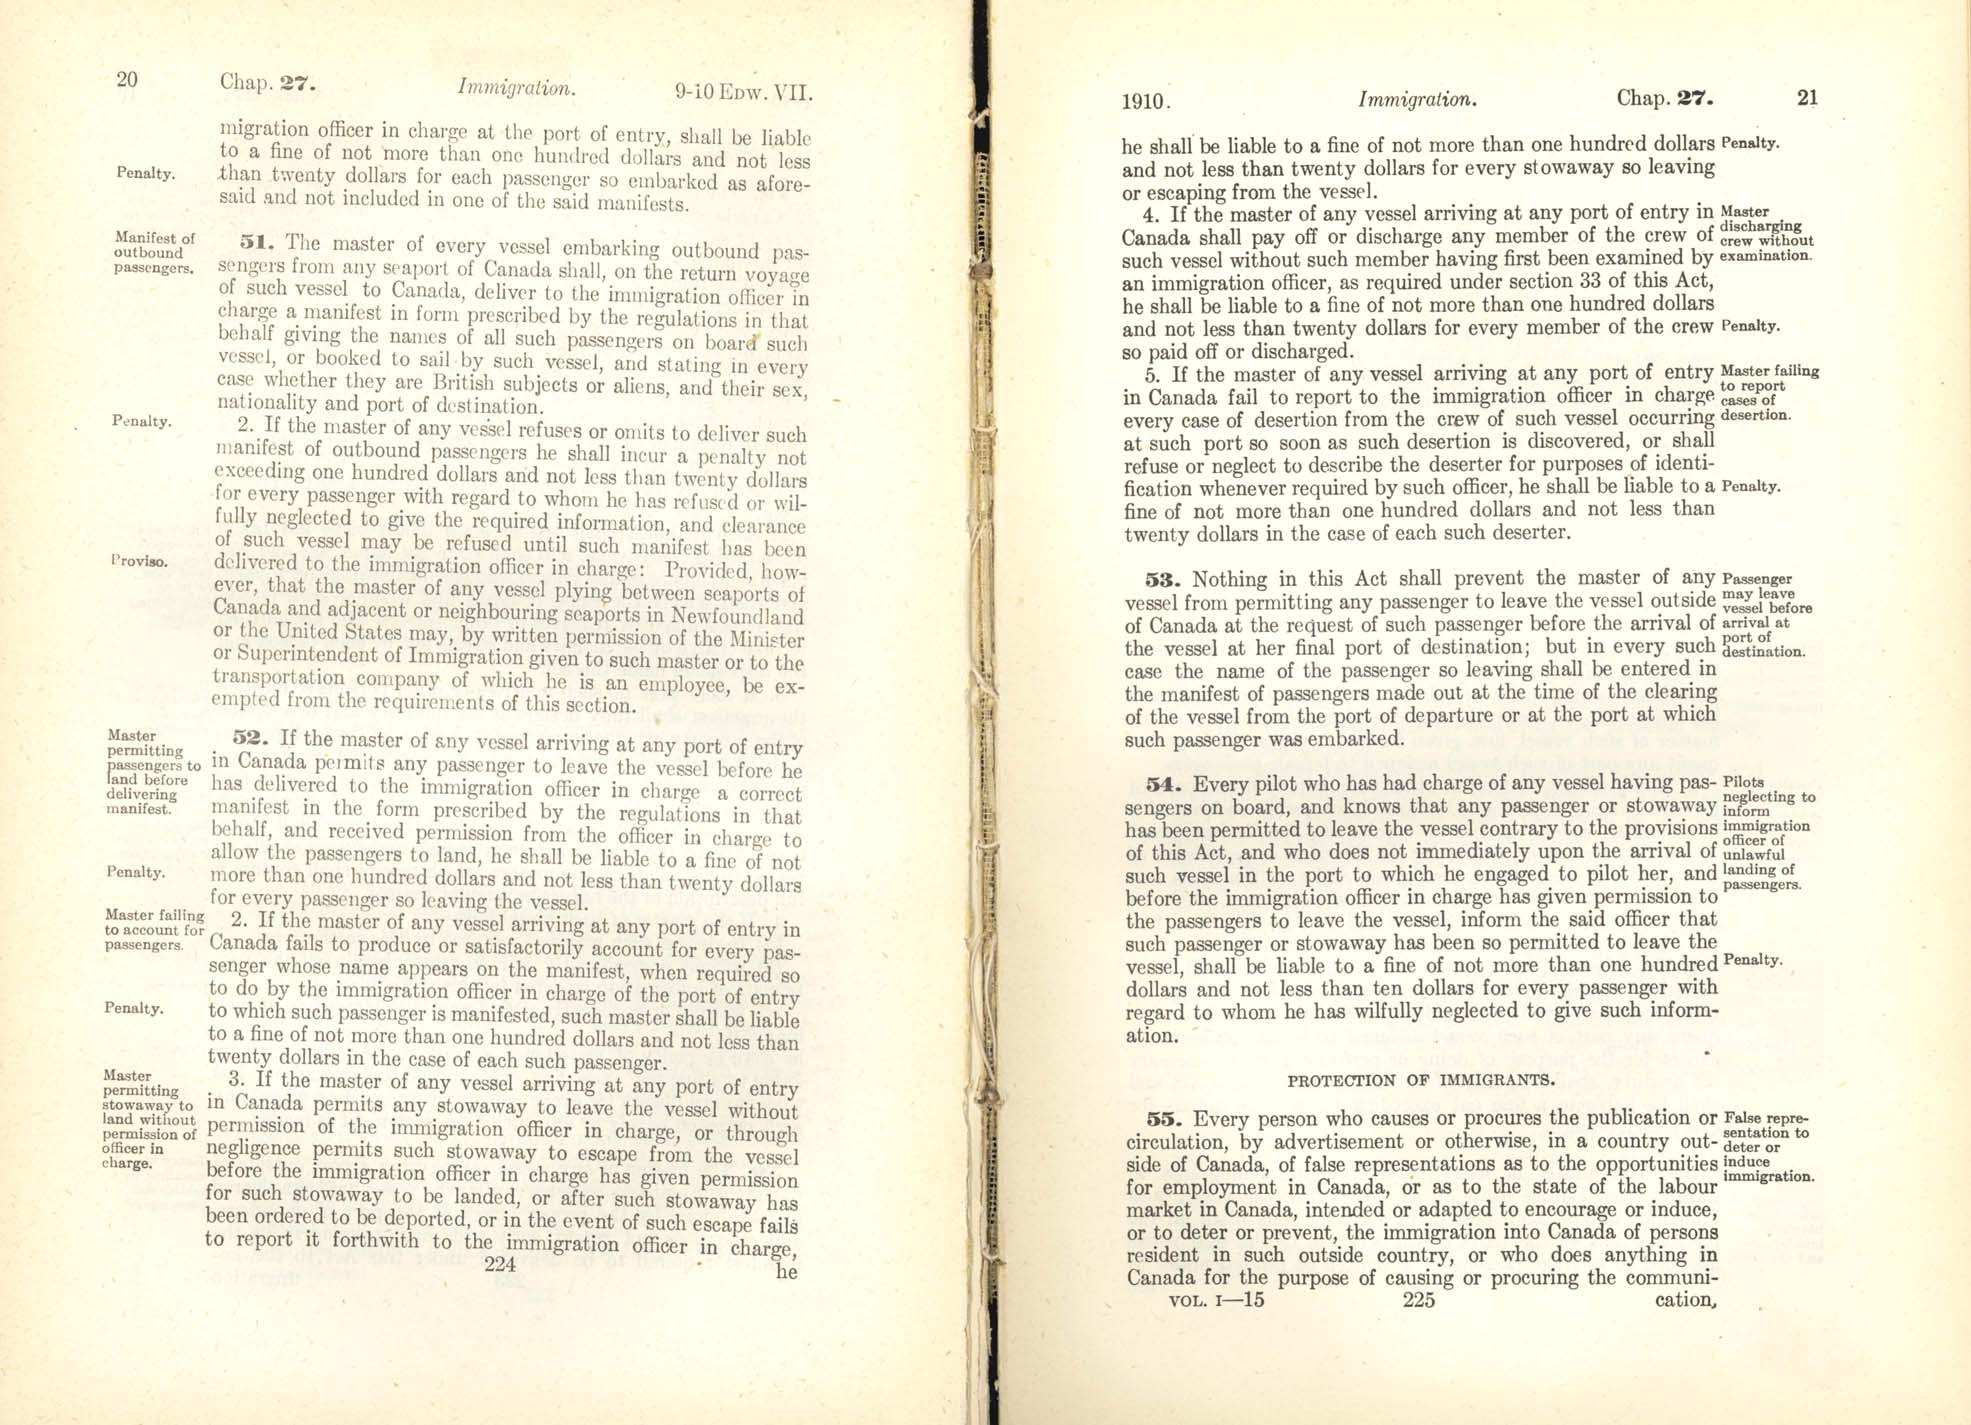 Chap. 27 Page 224, 225 Immigration Act, 1910